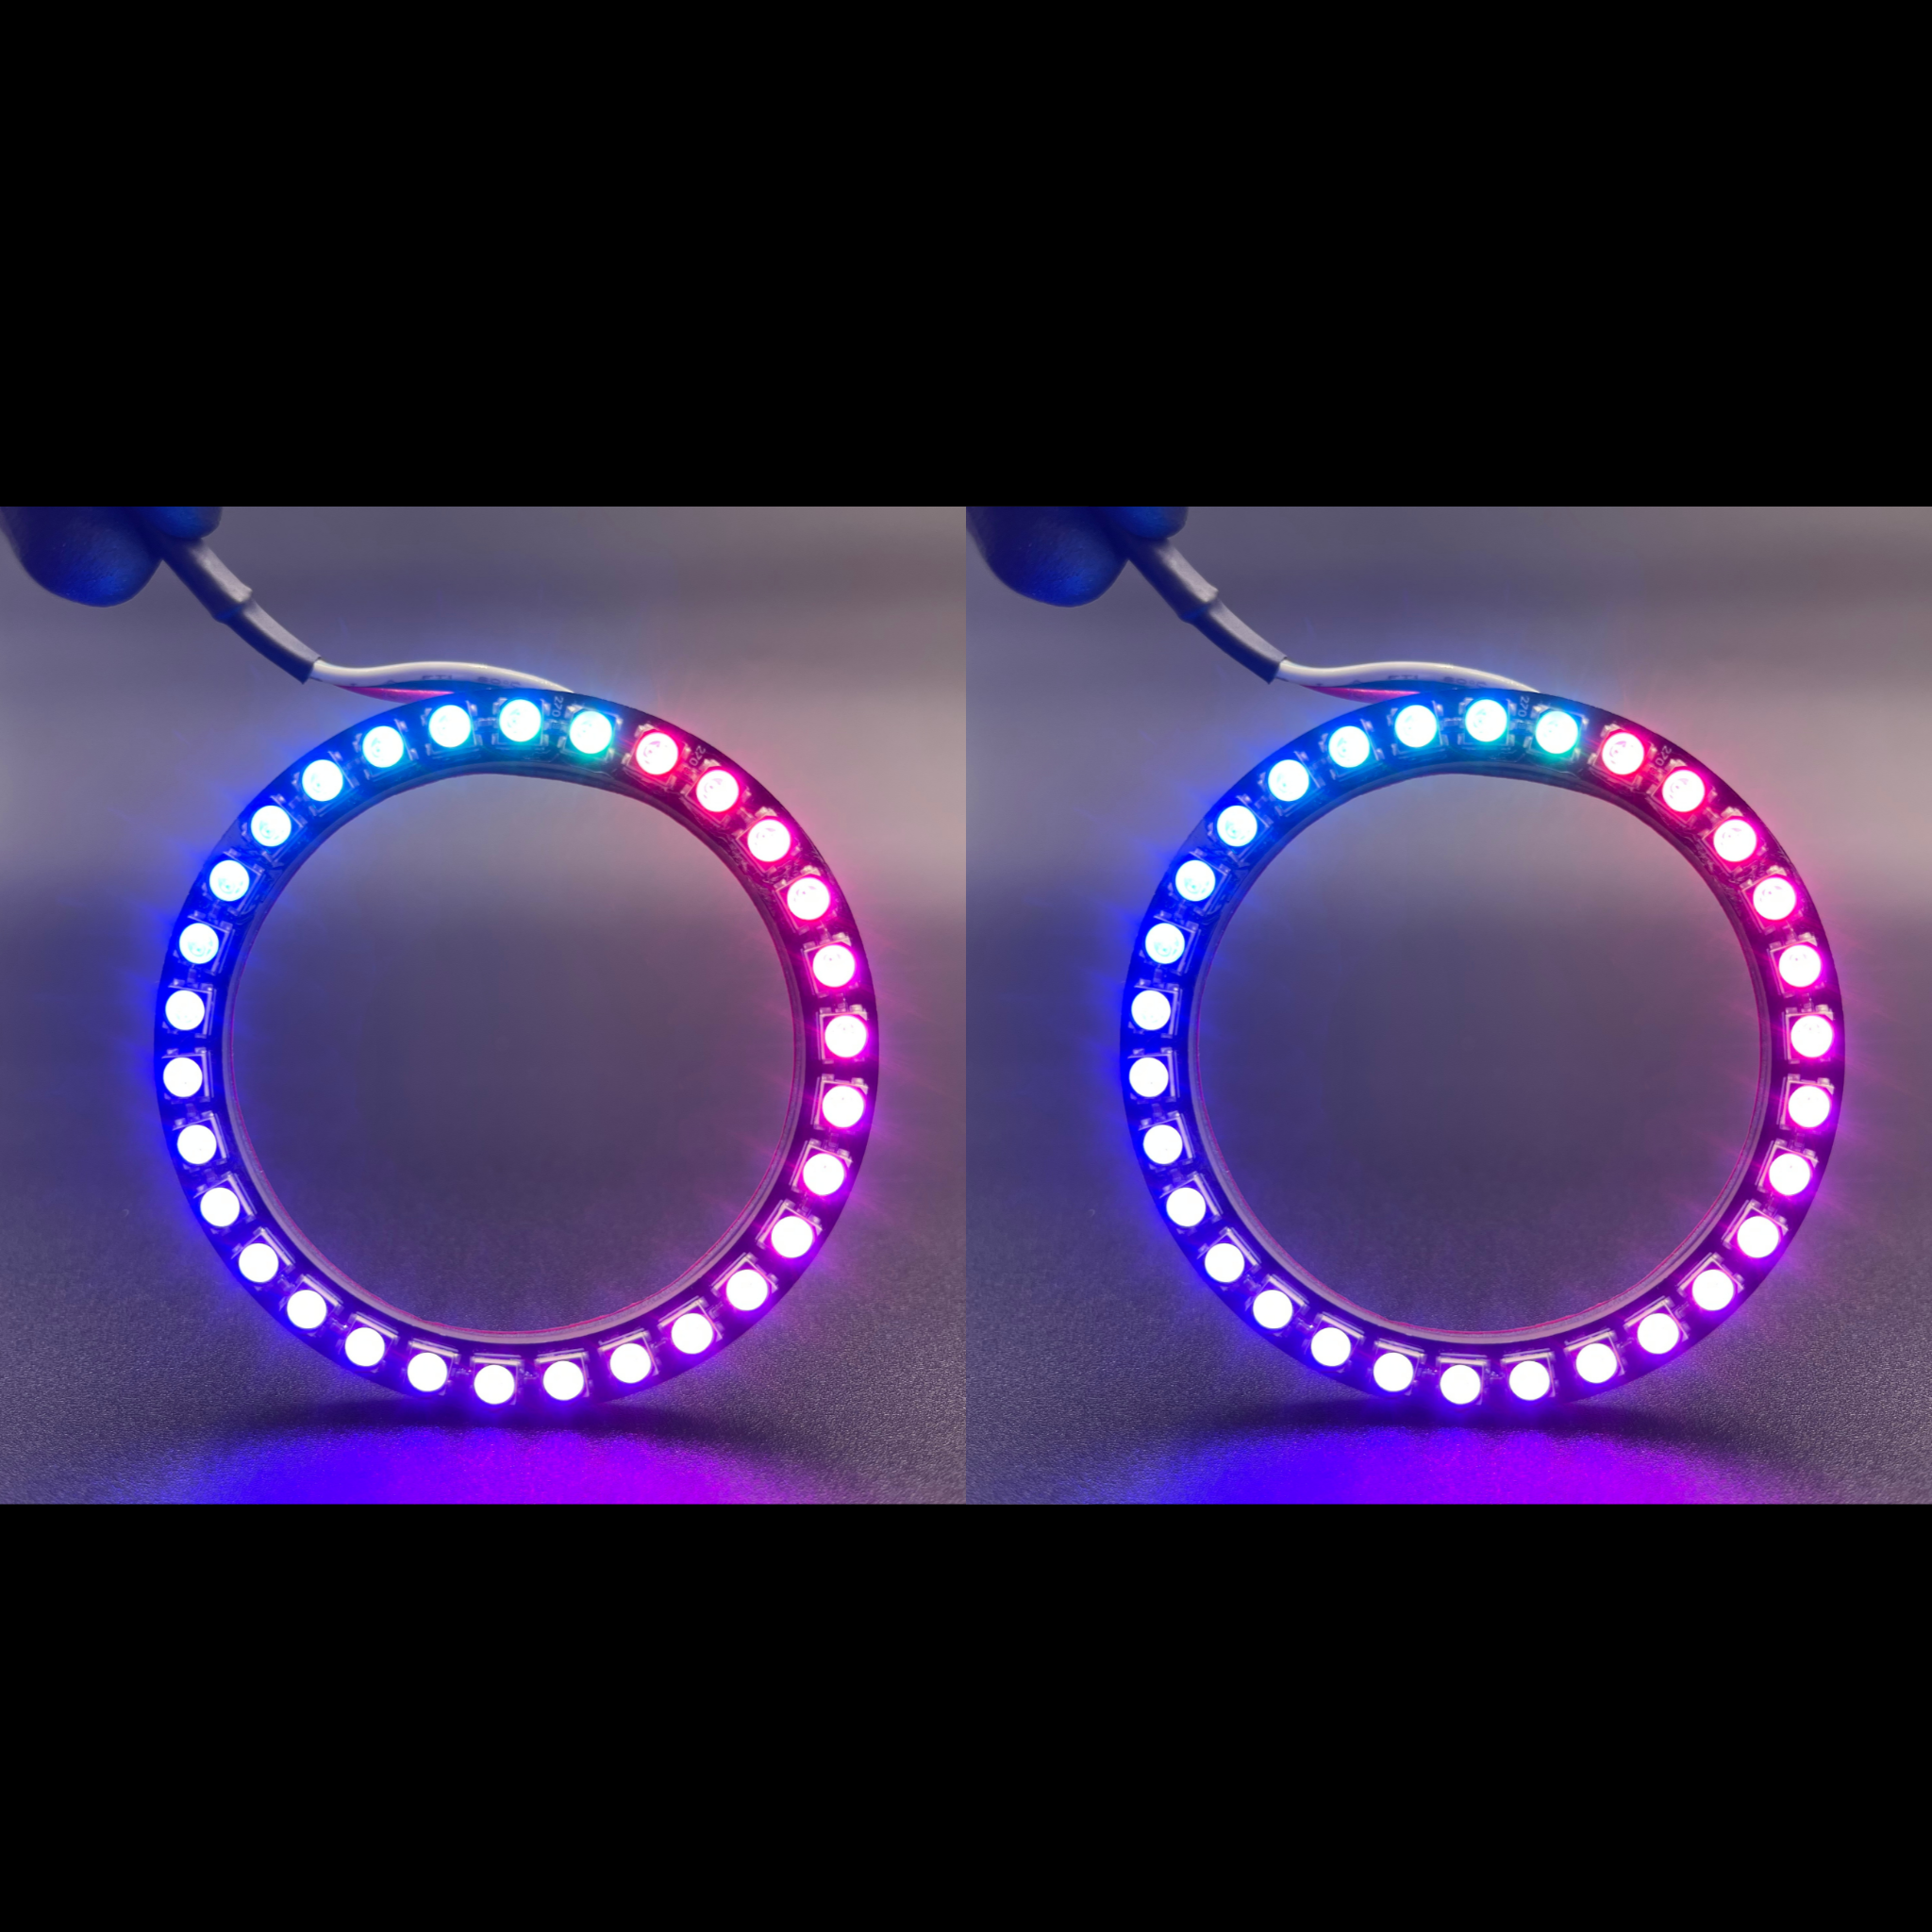 2010-2013 Ford Mustang Multicolor Halo Kit - RGB Halo Kits Multicolor Flow Series Color Chasing RGBWA LED headlight kit Oracle Lighting Trendz OneUpLighting Morimoto theretrofitsource AutoLEDTech Diode Dynamics